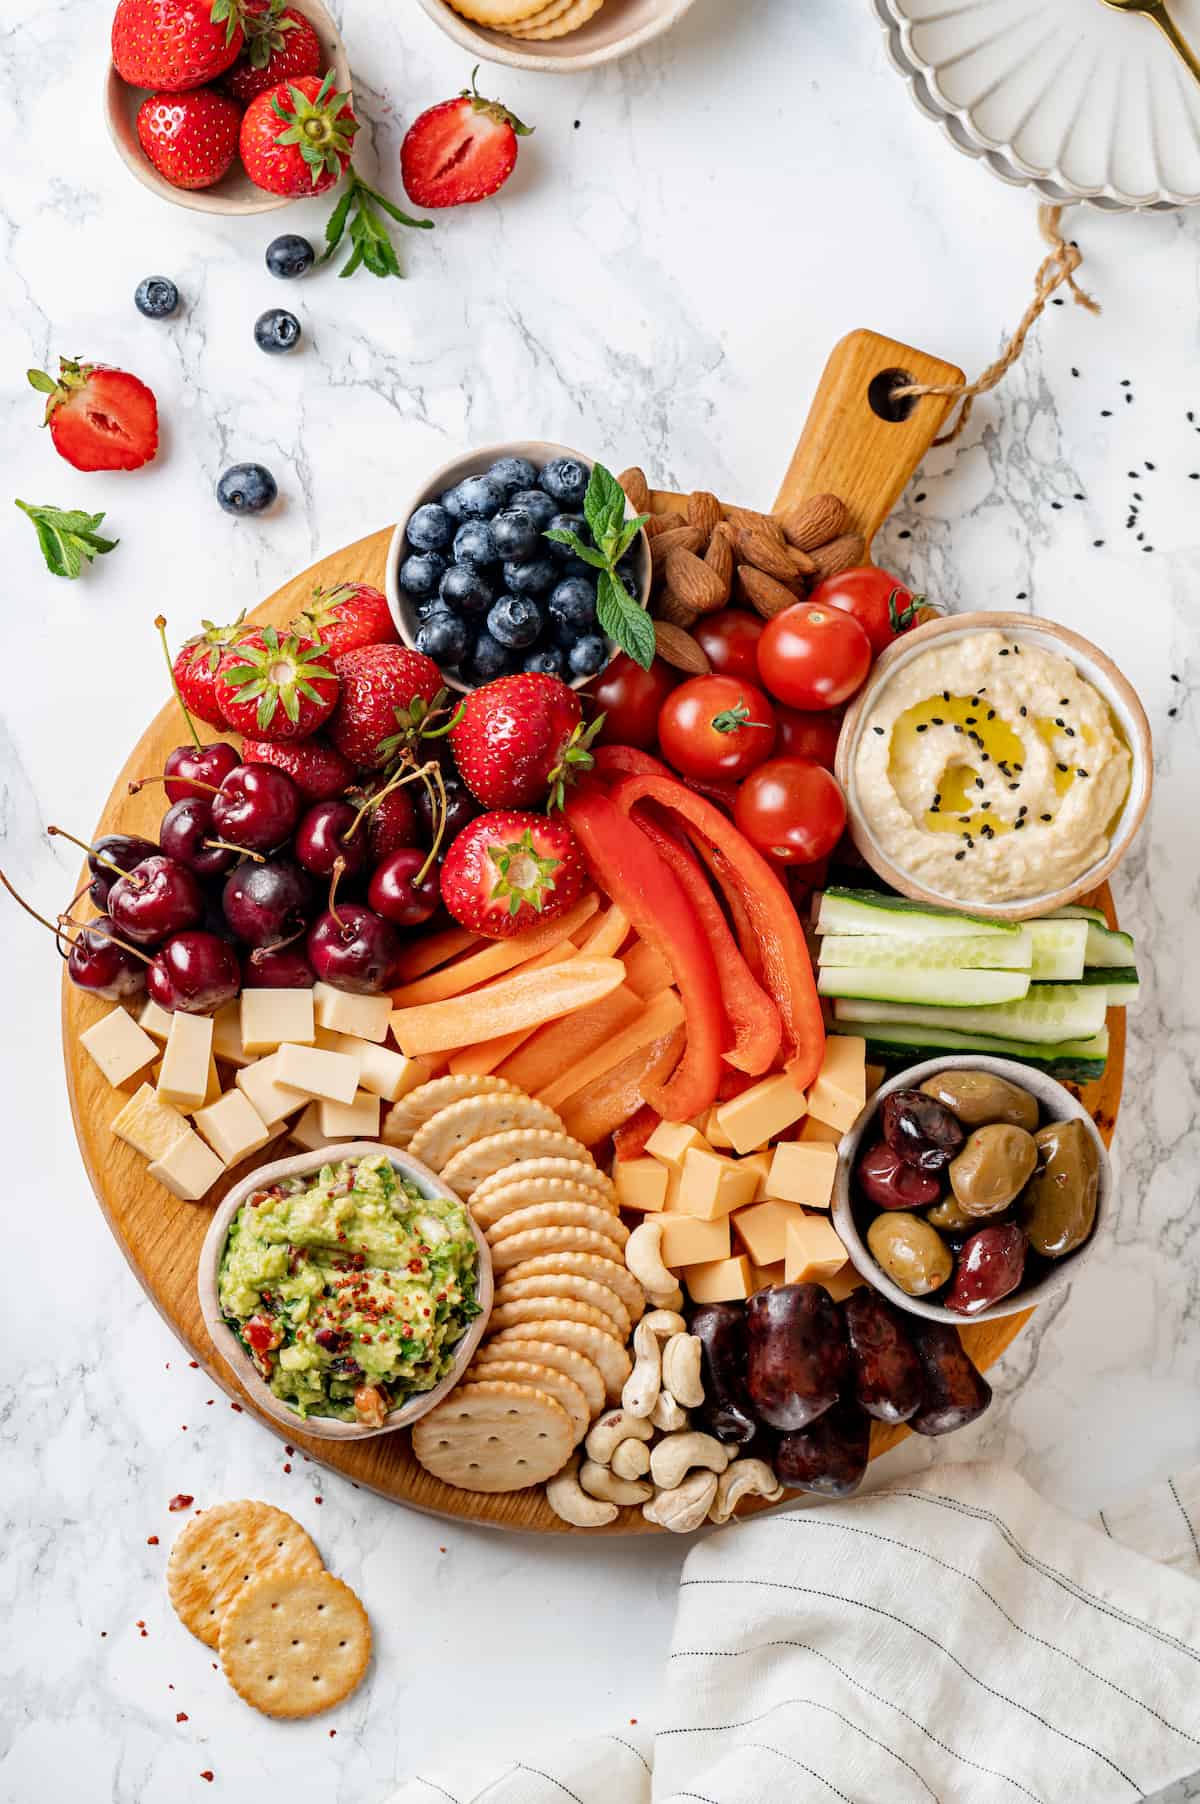 Overhead view of Vegan charcuterie board with cheese, olives, nuts, fruits, and veggies